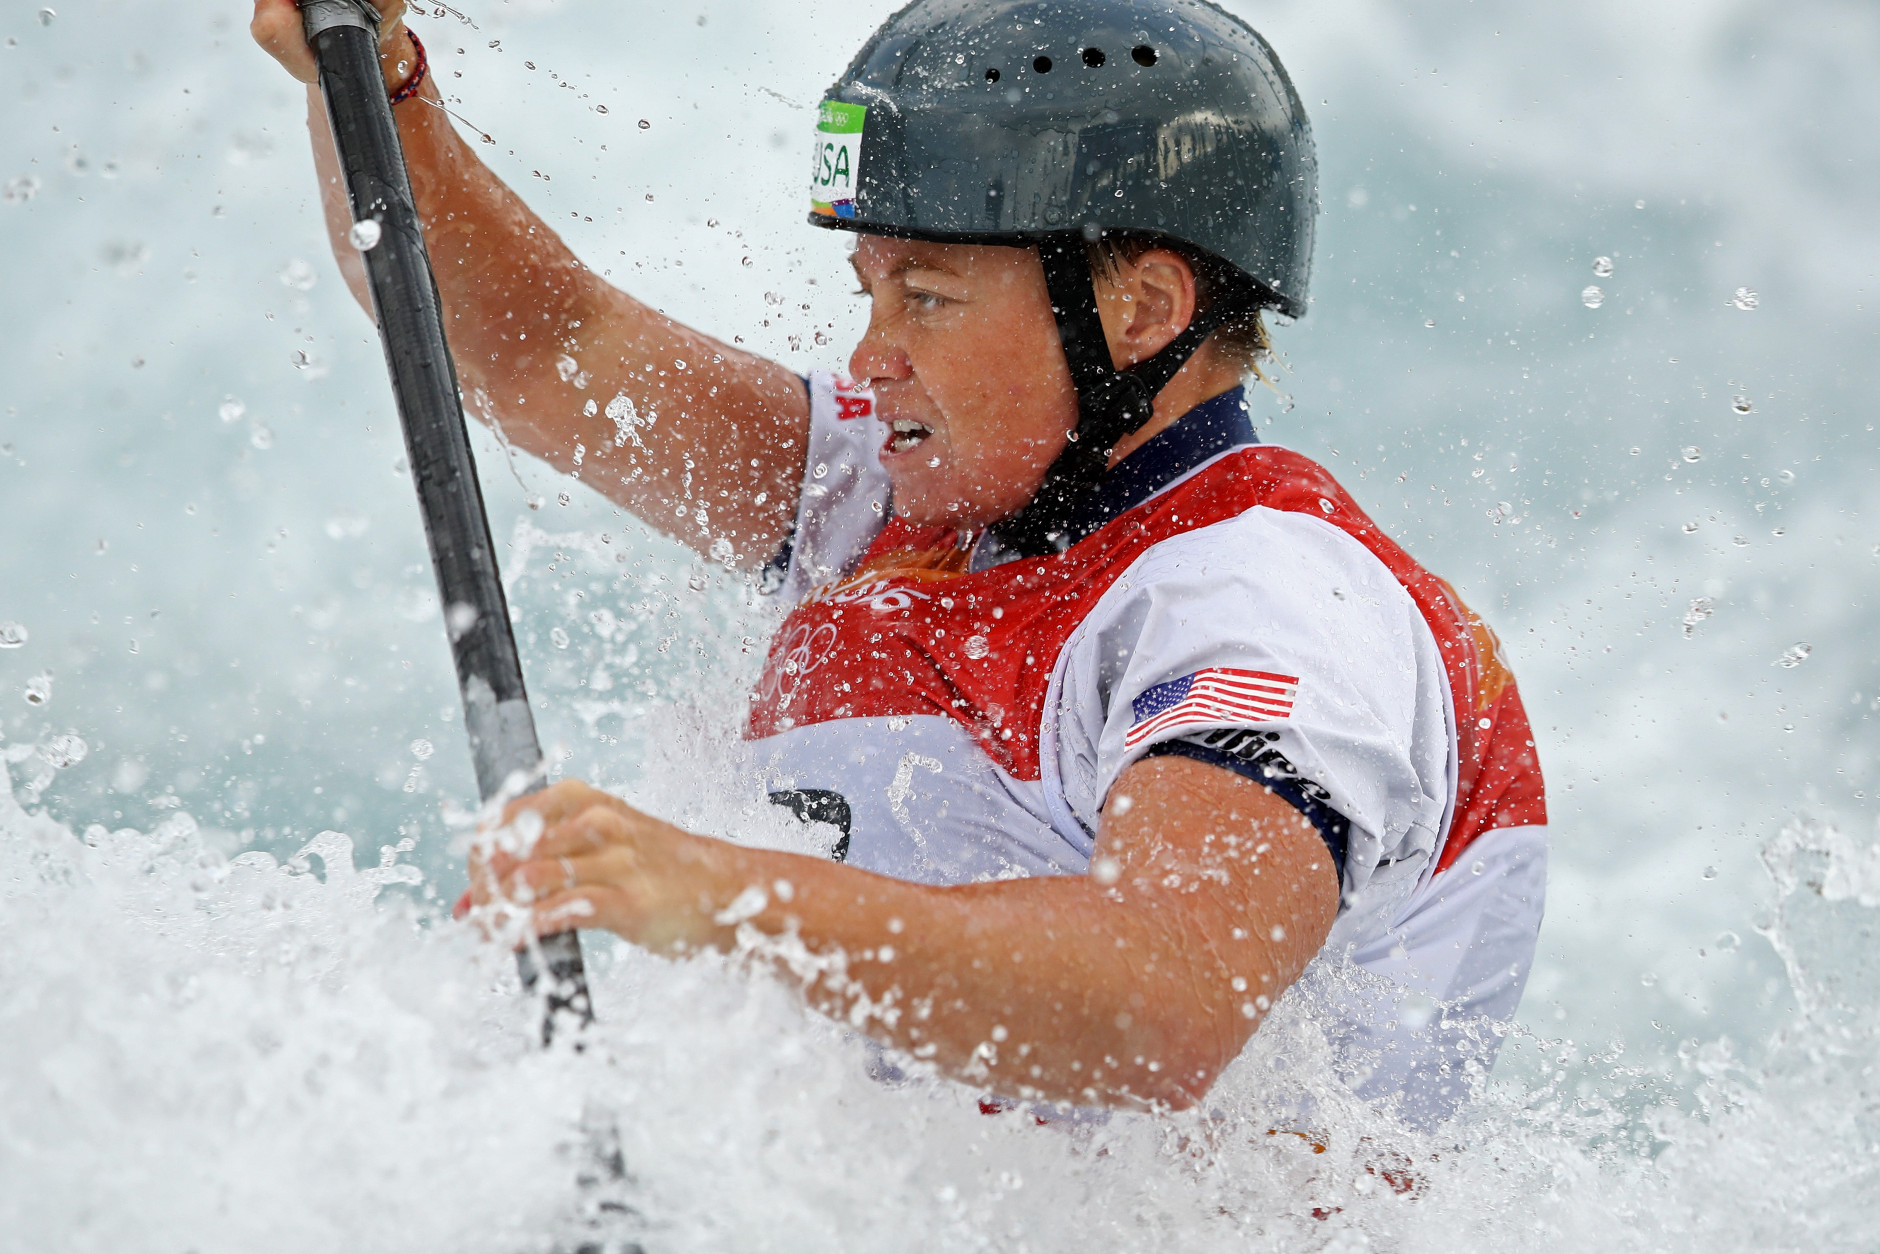 RIO DE JANEIRO, BRAZIL - AUGUST 08:  Ashley Nee of the United States competes during the Women's Kayak Slalom (K1) heats on Day 3 of the Rio 2016 Olympic Games at the Whitewater Stadium on August 8, 2016 in Rio de Janeiro, Brazil.  (Photo by Mark Kolbe/Getty Images)